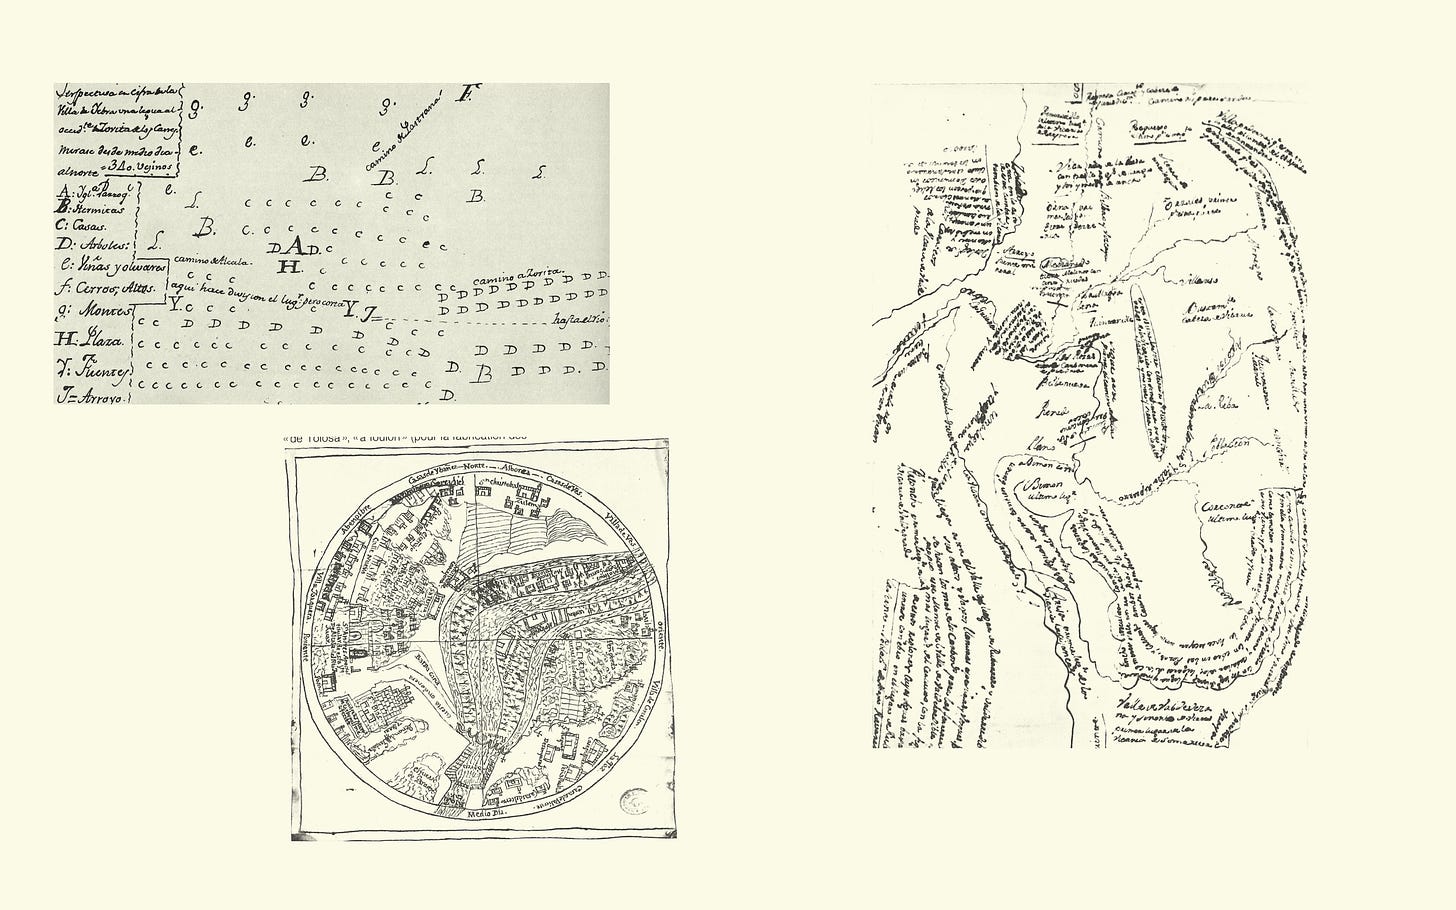 three hand drawn maps. in the first, an alphabetical key is written on the left and the map itself consists entirely of letters written into space. in a second, a circle is split into four quadrants with intricate buildings and landscapes. in a third, swirling text designates what looks like roads and rivers